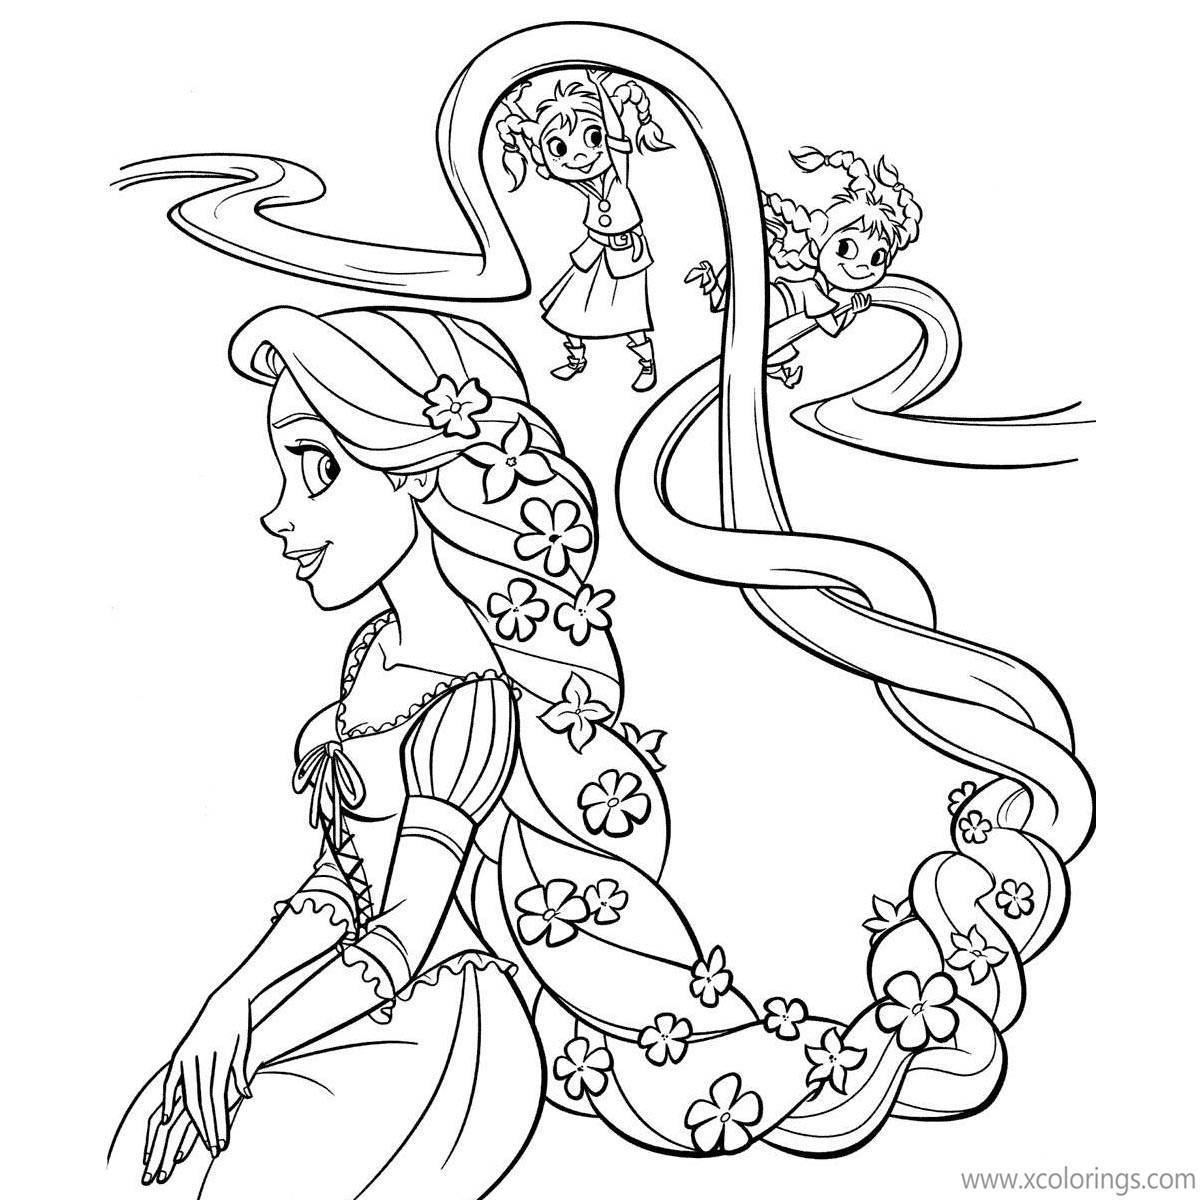 Free Rapunzel Coloring Pages Long Hair with Flowers printable